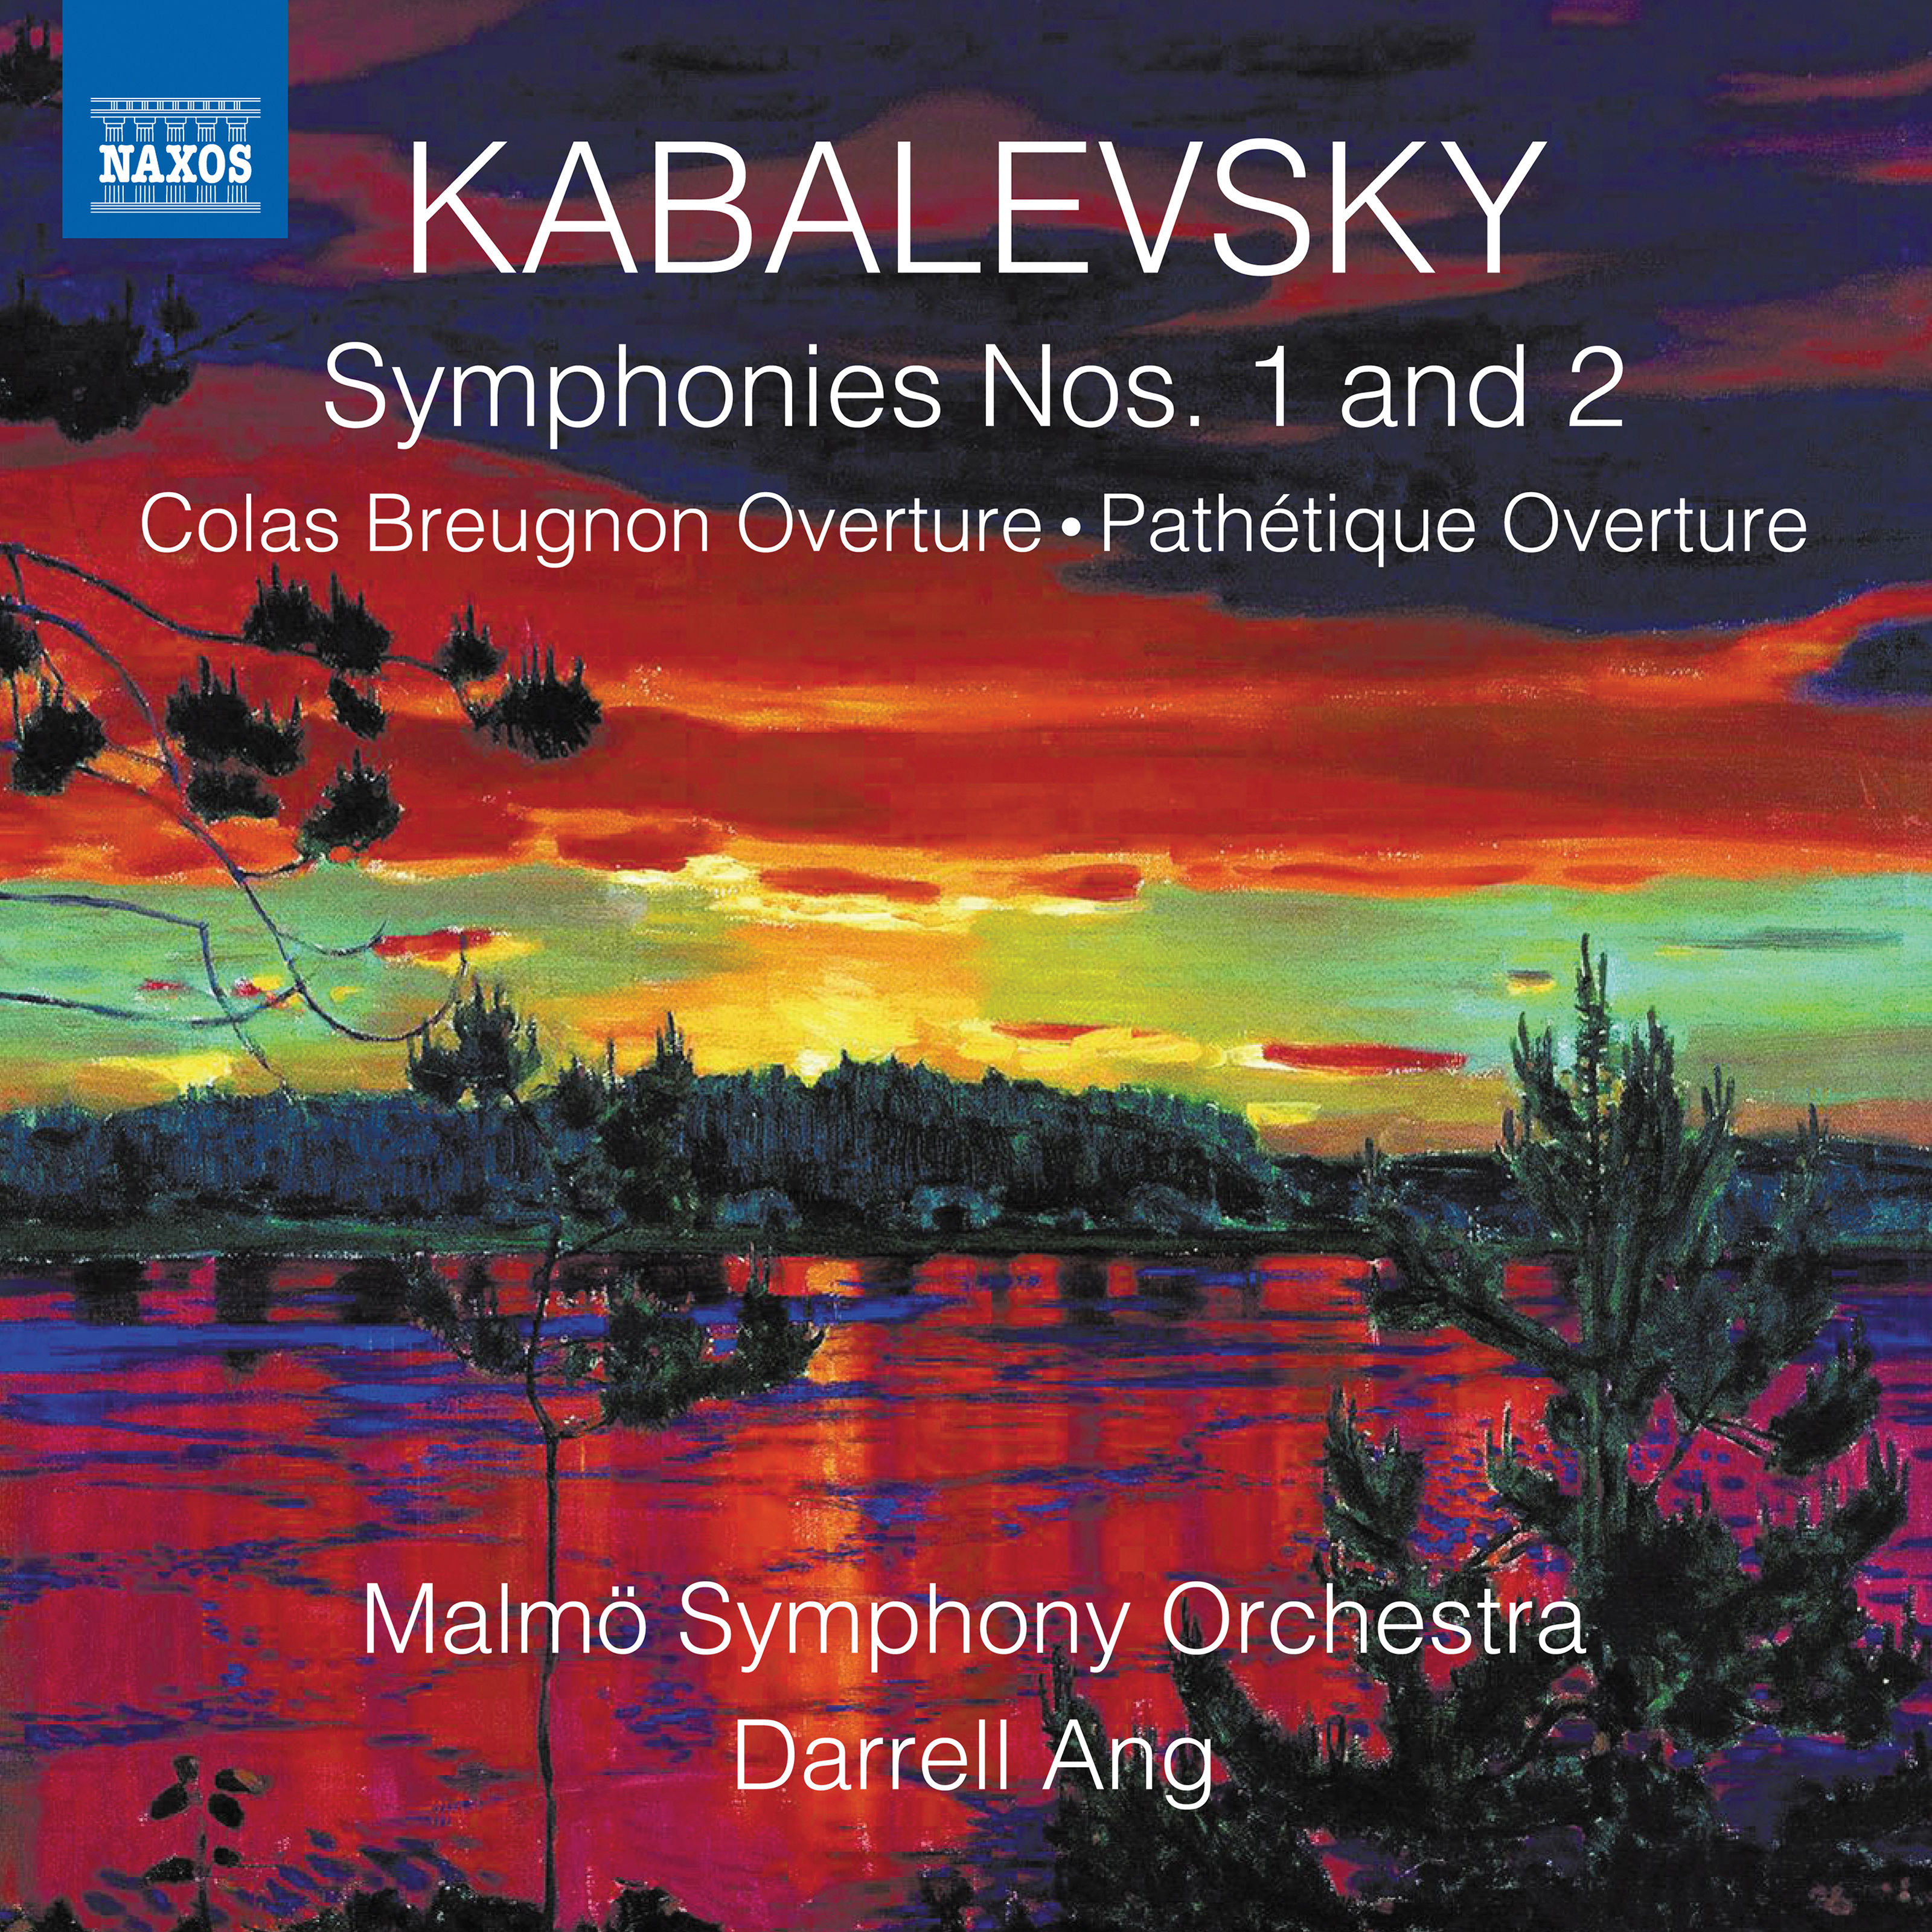 Malmo Symphony Orchestra & Darrell Ang - Kabalevsky: Works for Orchestra (2019) [FLAC 24bit/96kHz]